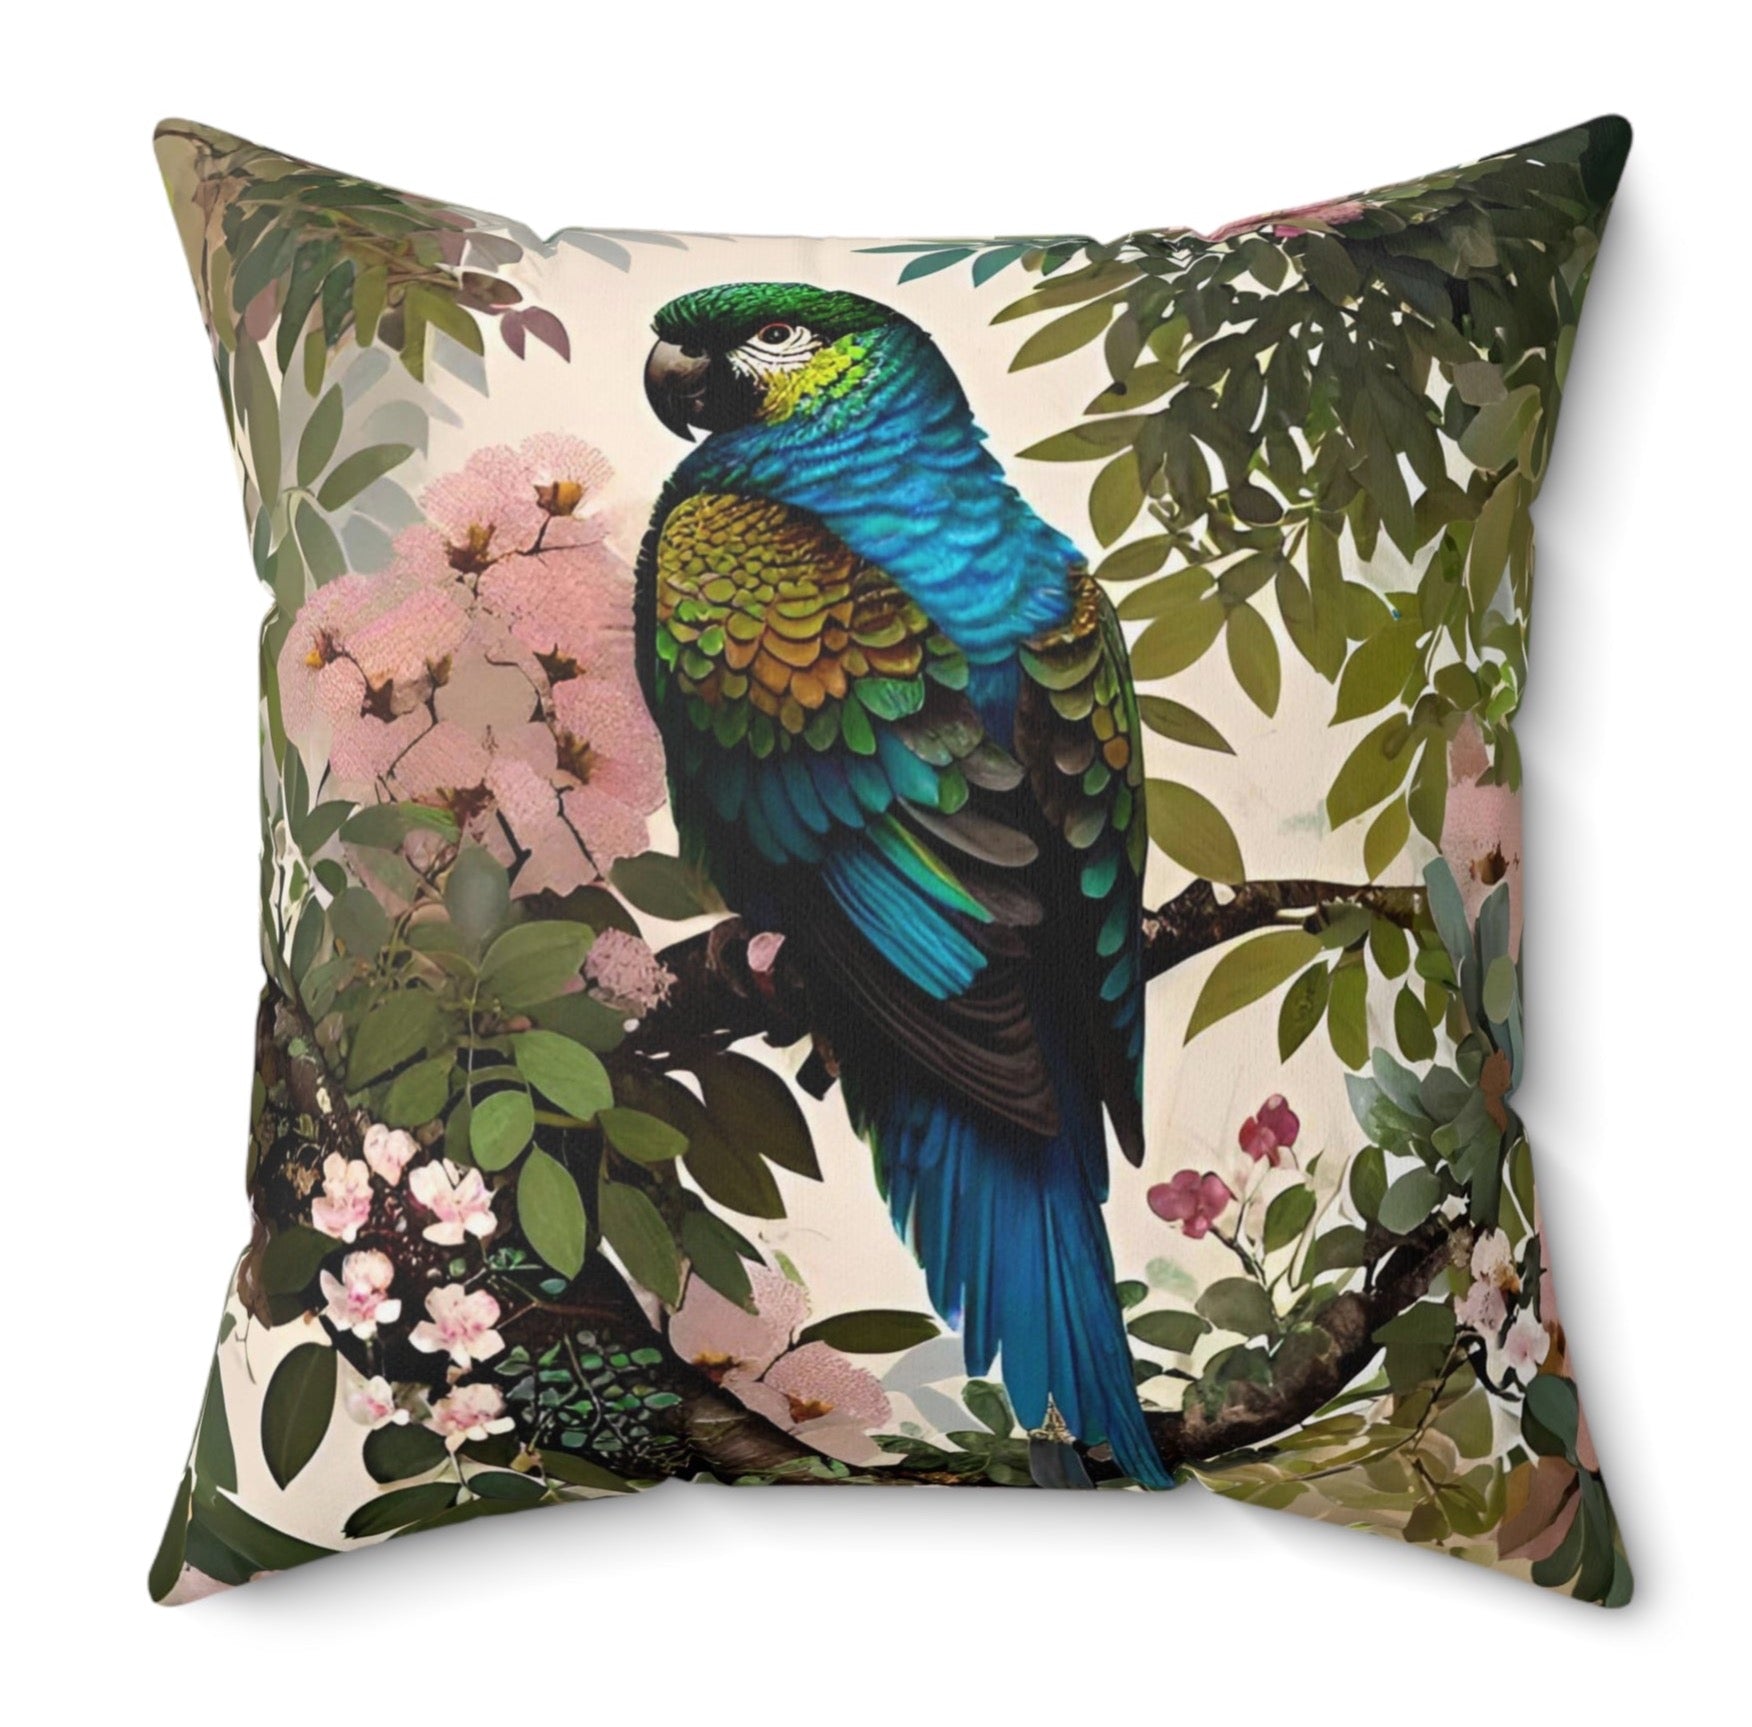 Floral Vintage Botanical Parrot Maximalist Throw Pillow Polyester Square Cover Cushion